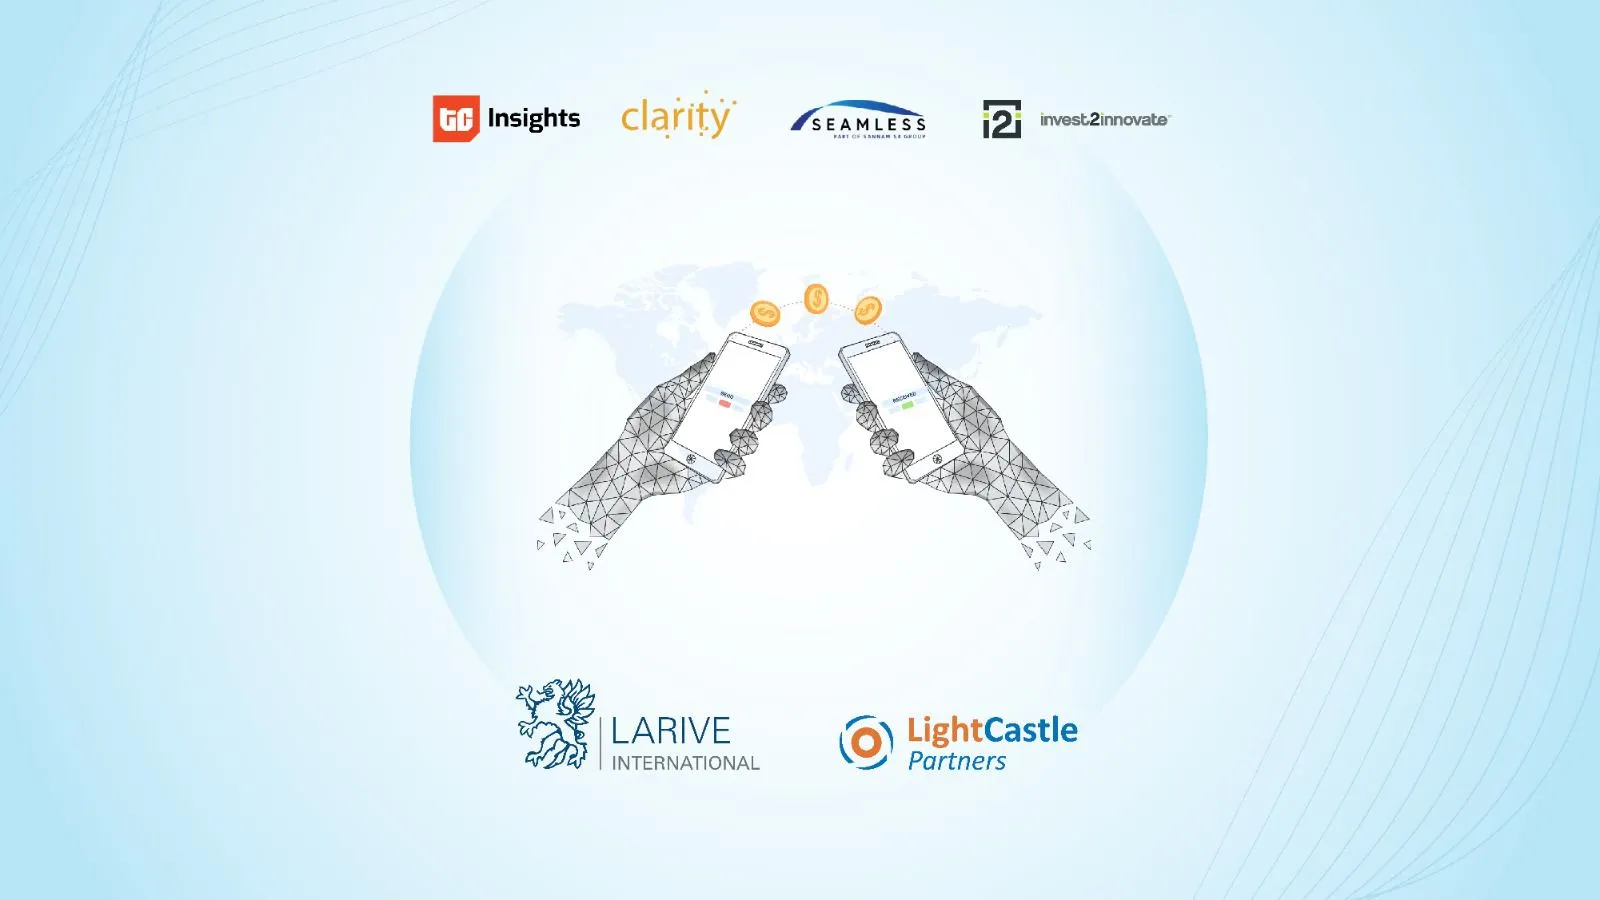 Larive International and LightCastle Partners Join Hands with the Bill & Melinda Gates Foundation to Explore the Digital Financial Service (DFS) Landscape in Nine Countries